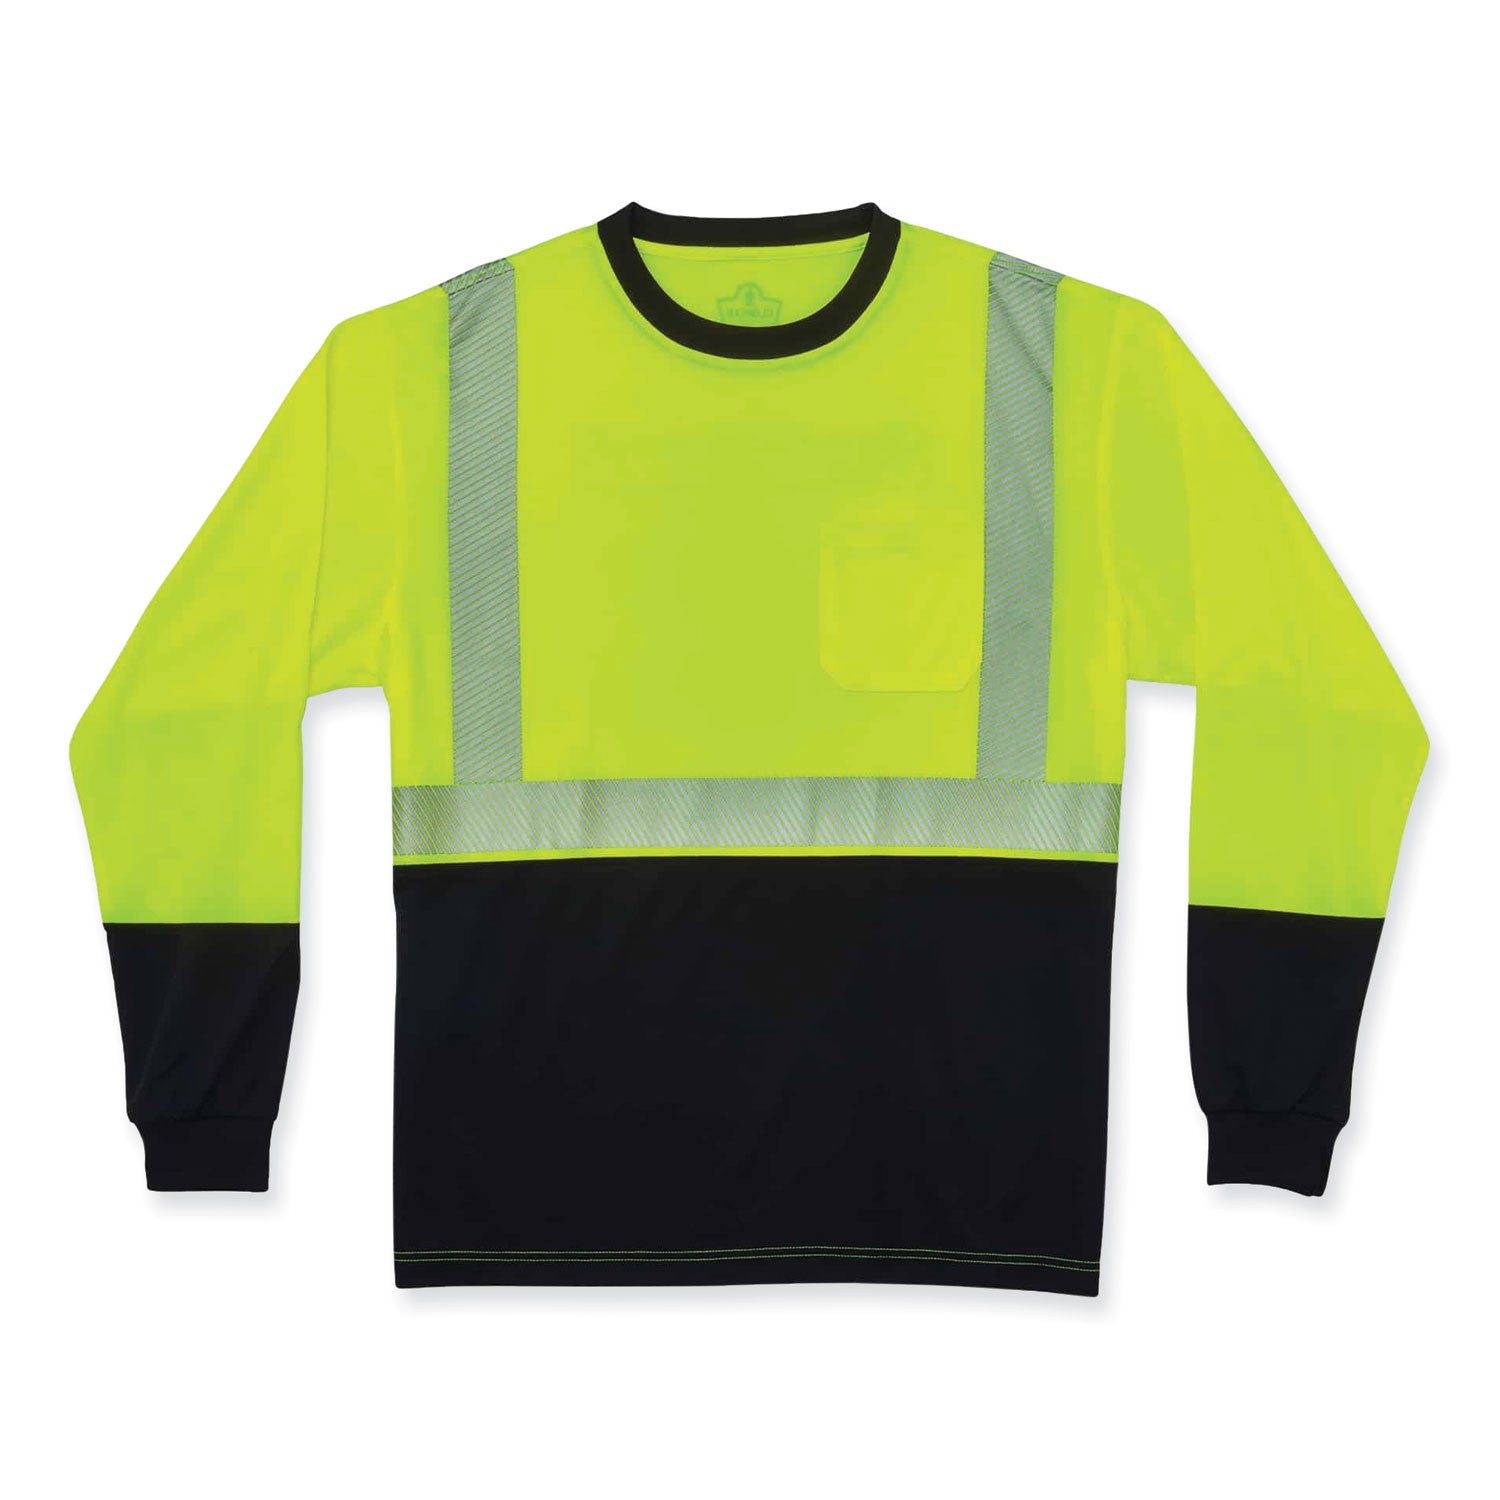 glowear-8281bk-class-2-long-sleeve-shirt-with-black-bottom-polyester-small-lime-ships-in-1-3-business-days_ego22632 - 1